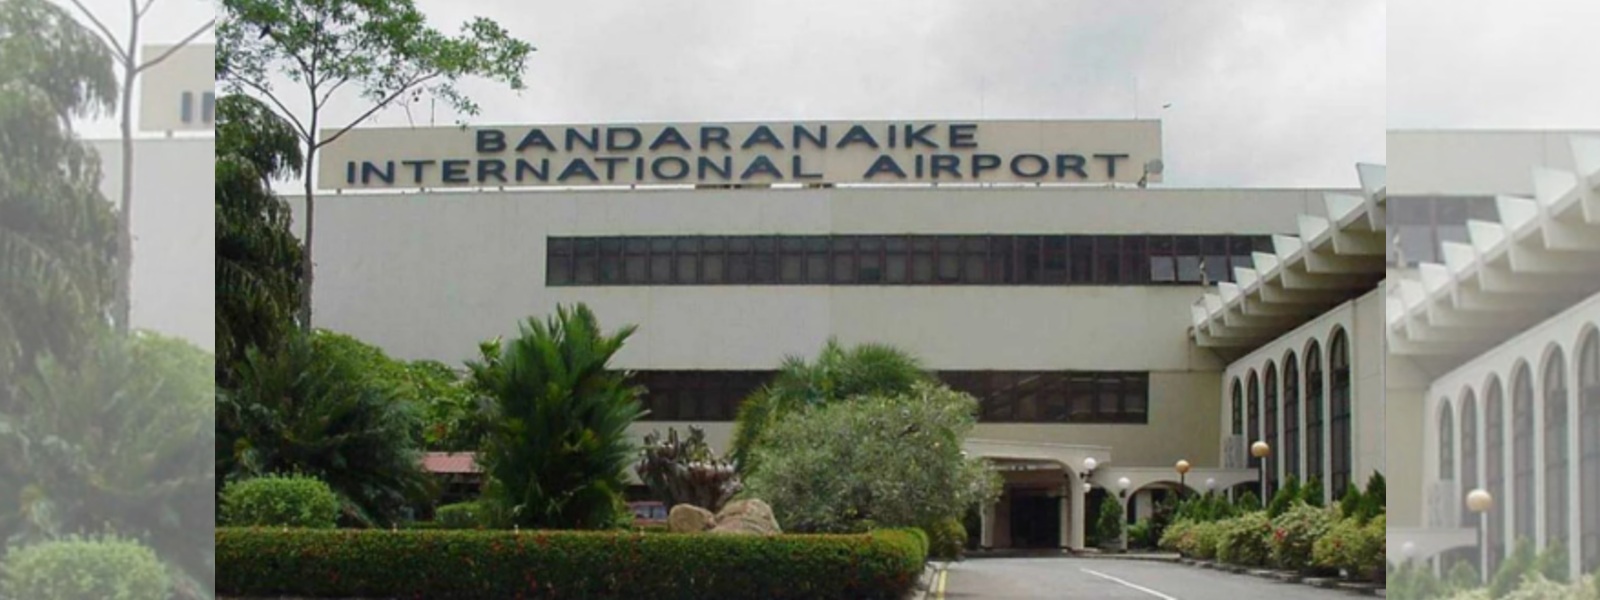 PCR Laboratory at Bandaranaike International Airport to commence operations on Monday (July 13)